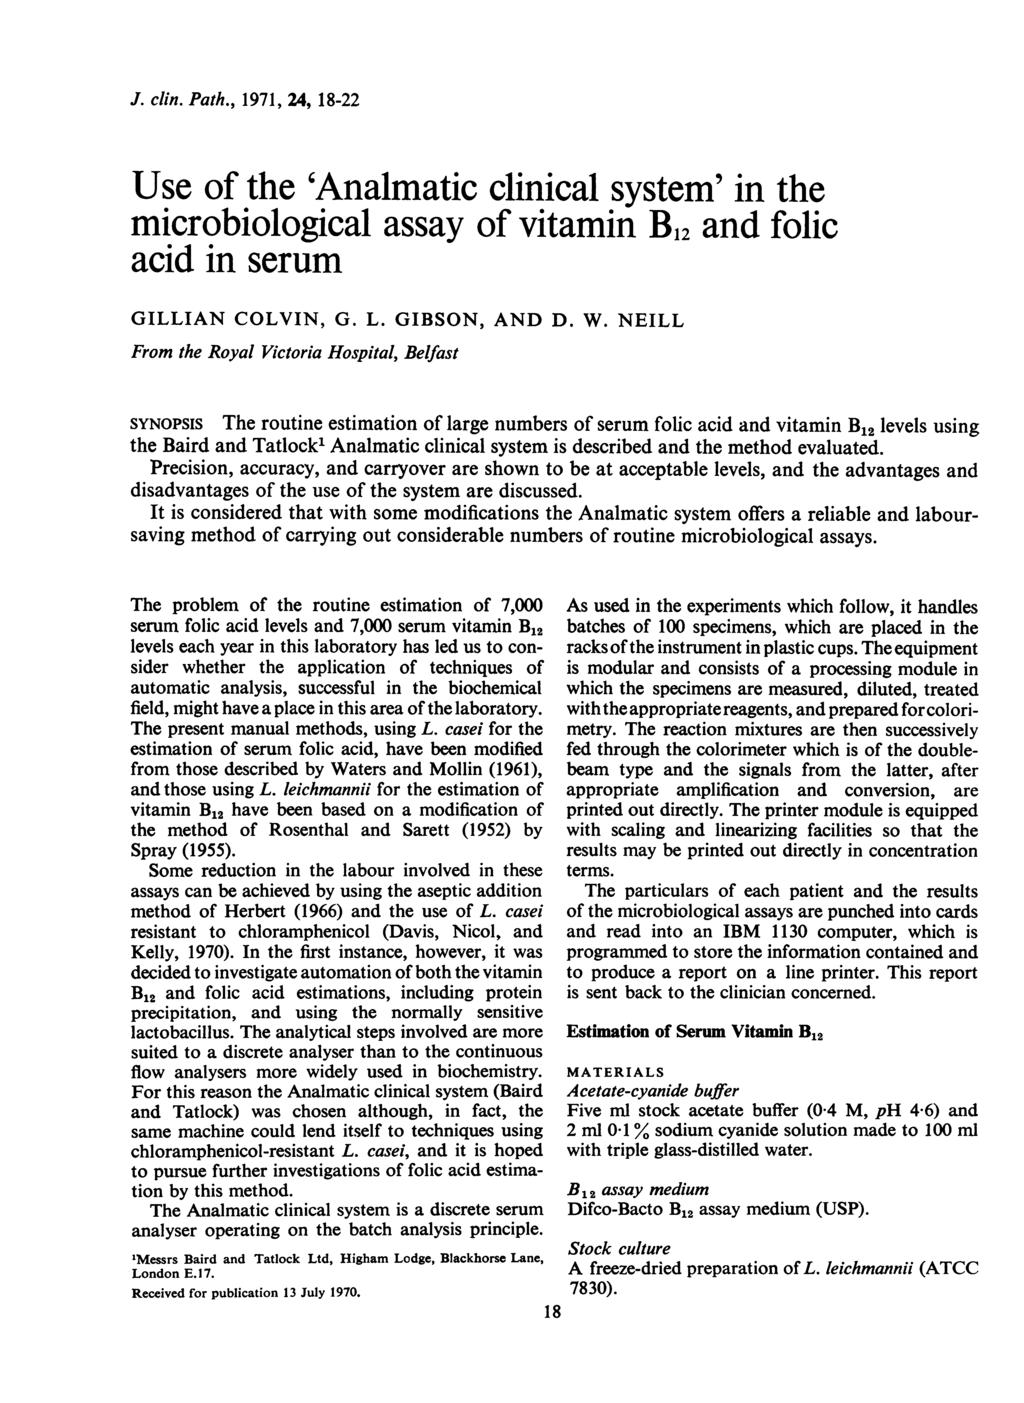 J. clin. Path., 1971, 24, 18-22 Use of the 'Analmatic clinical system' in the microbiological assay of vitamin B12 and folic acid in serum GILLIAN COLVIN, G. L. GIBSON, AND D. W.